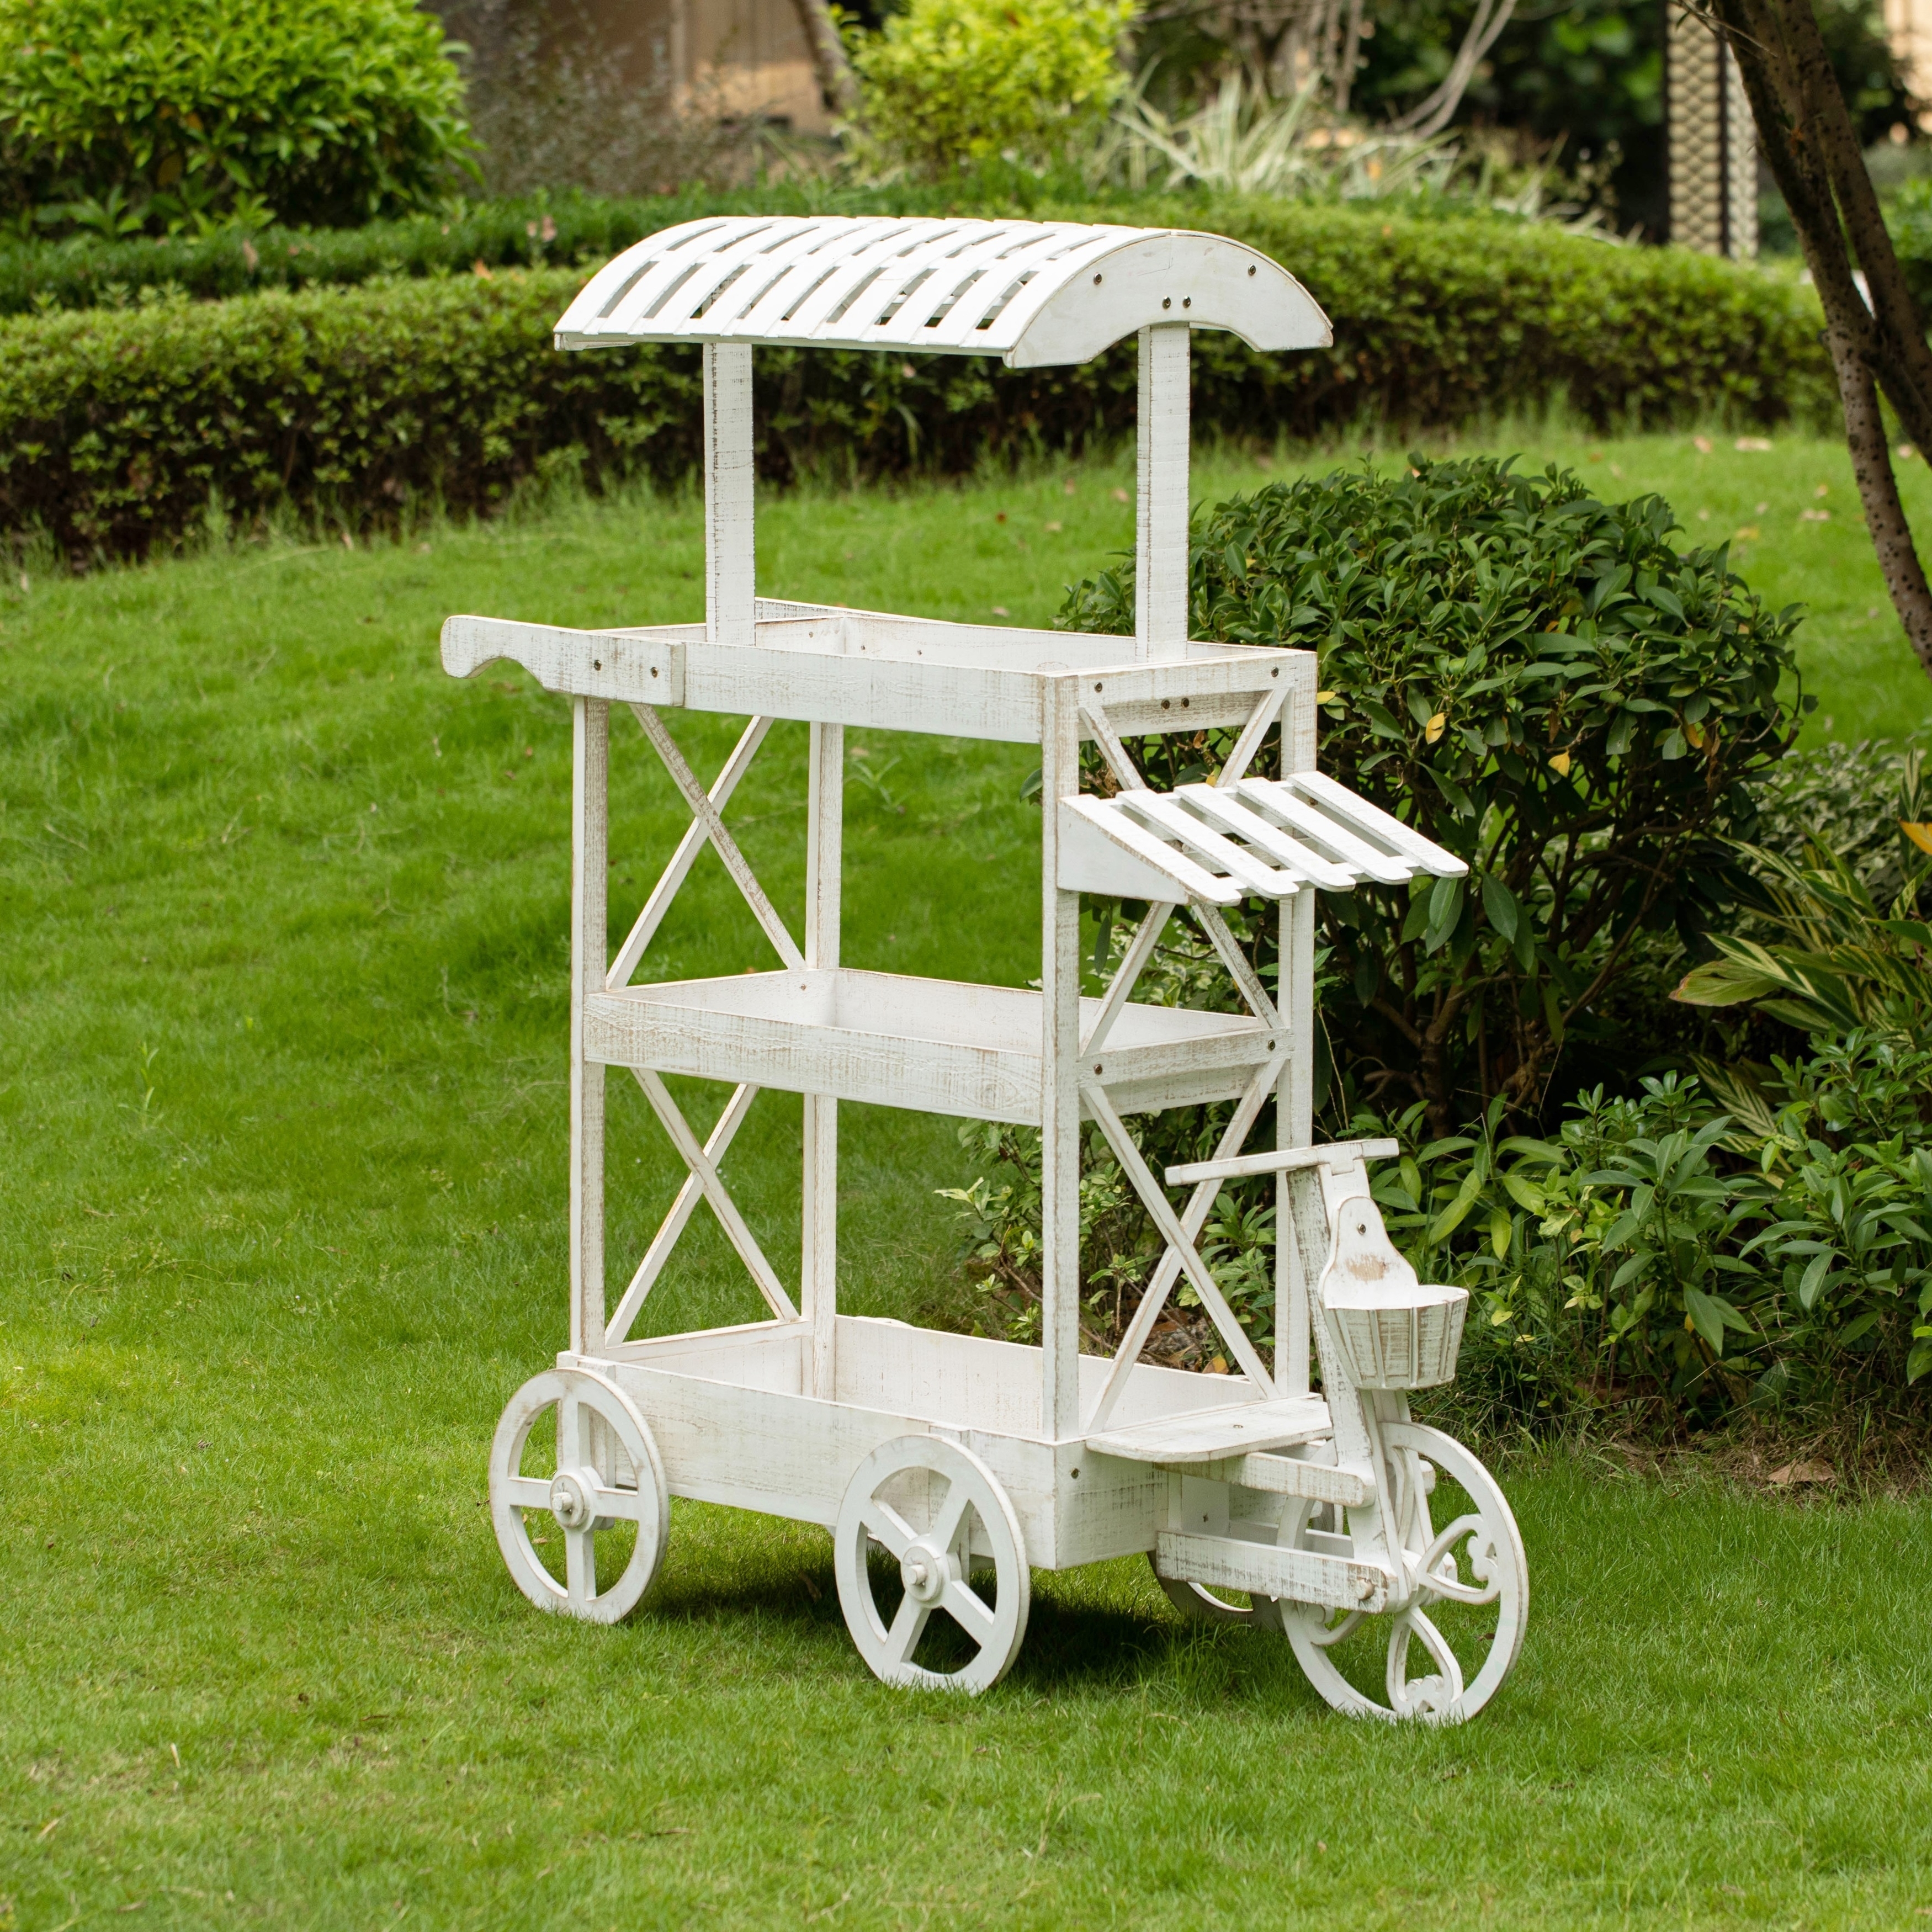 White Wood Decor Display Rack Mobile Food Cart With Wheels 3 Tier For Display, Wood Wagon With Shelves For Food And More